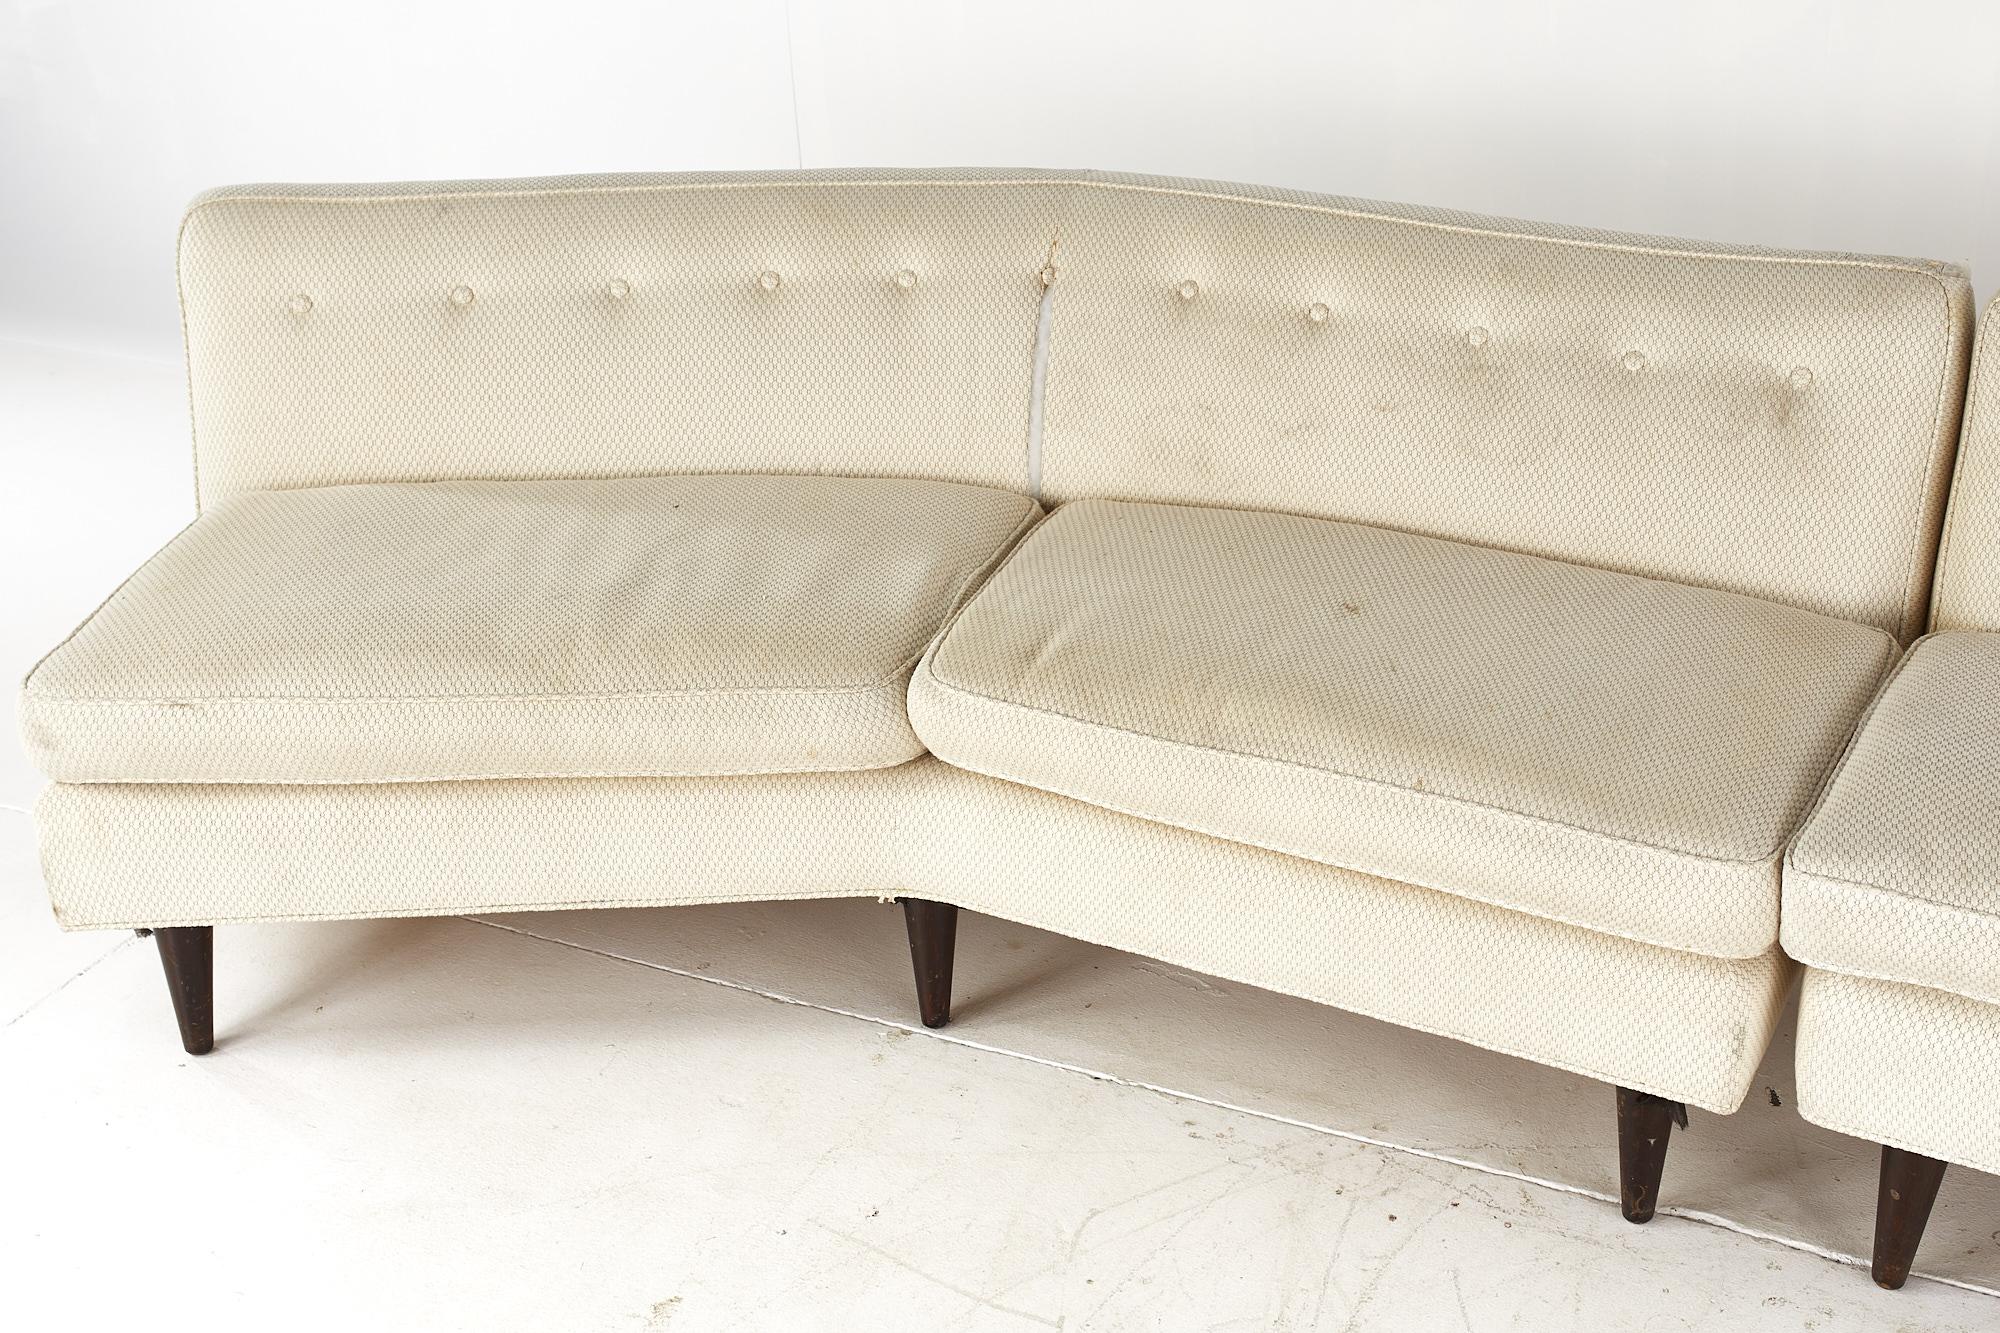 Late 20th Century Edward Wormley for Dunbar Midcentury Sectional Sofa For Sale